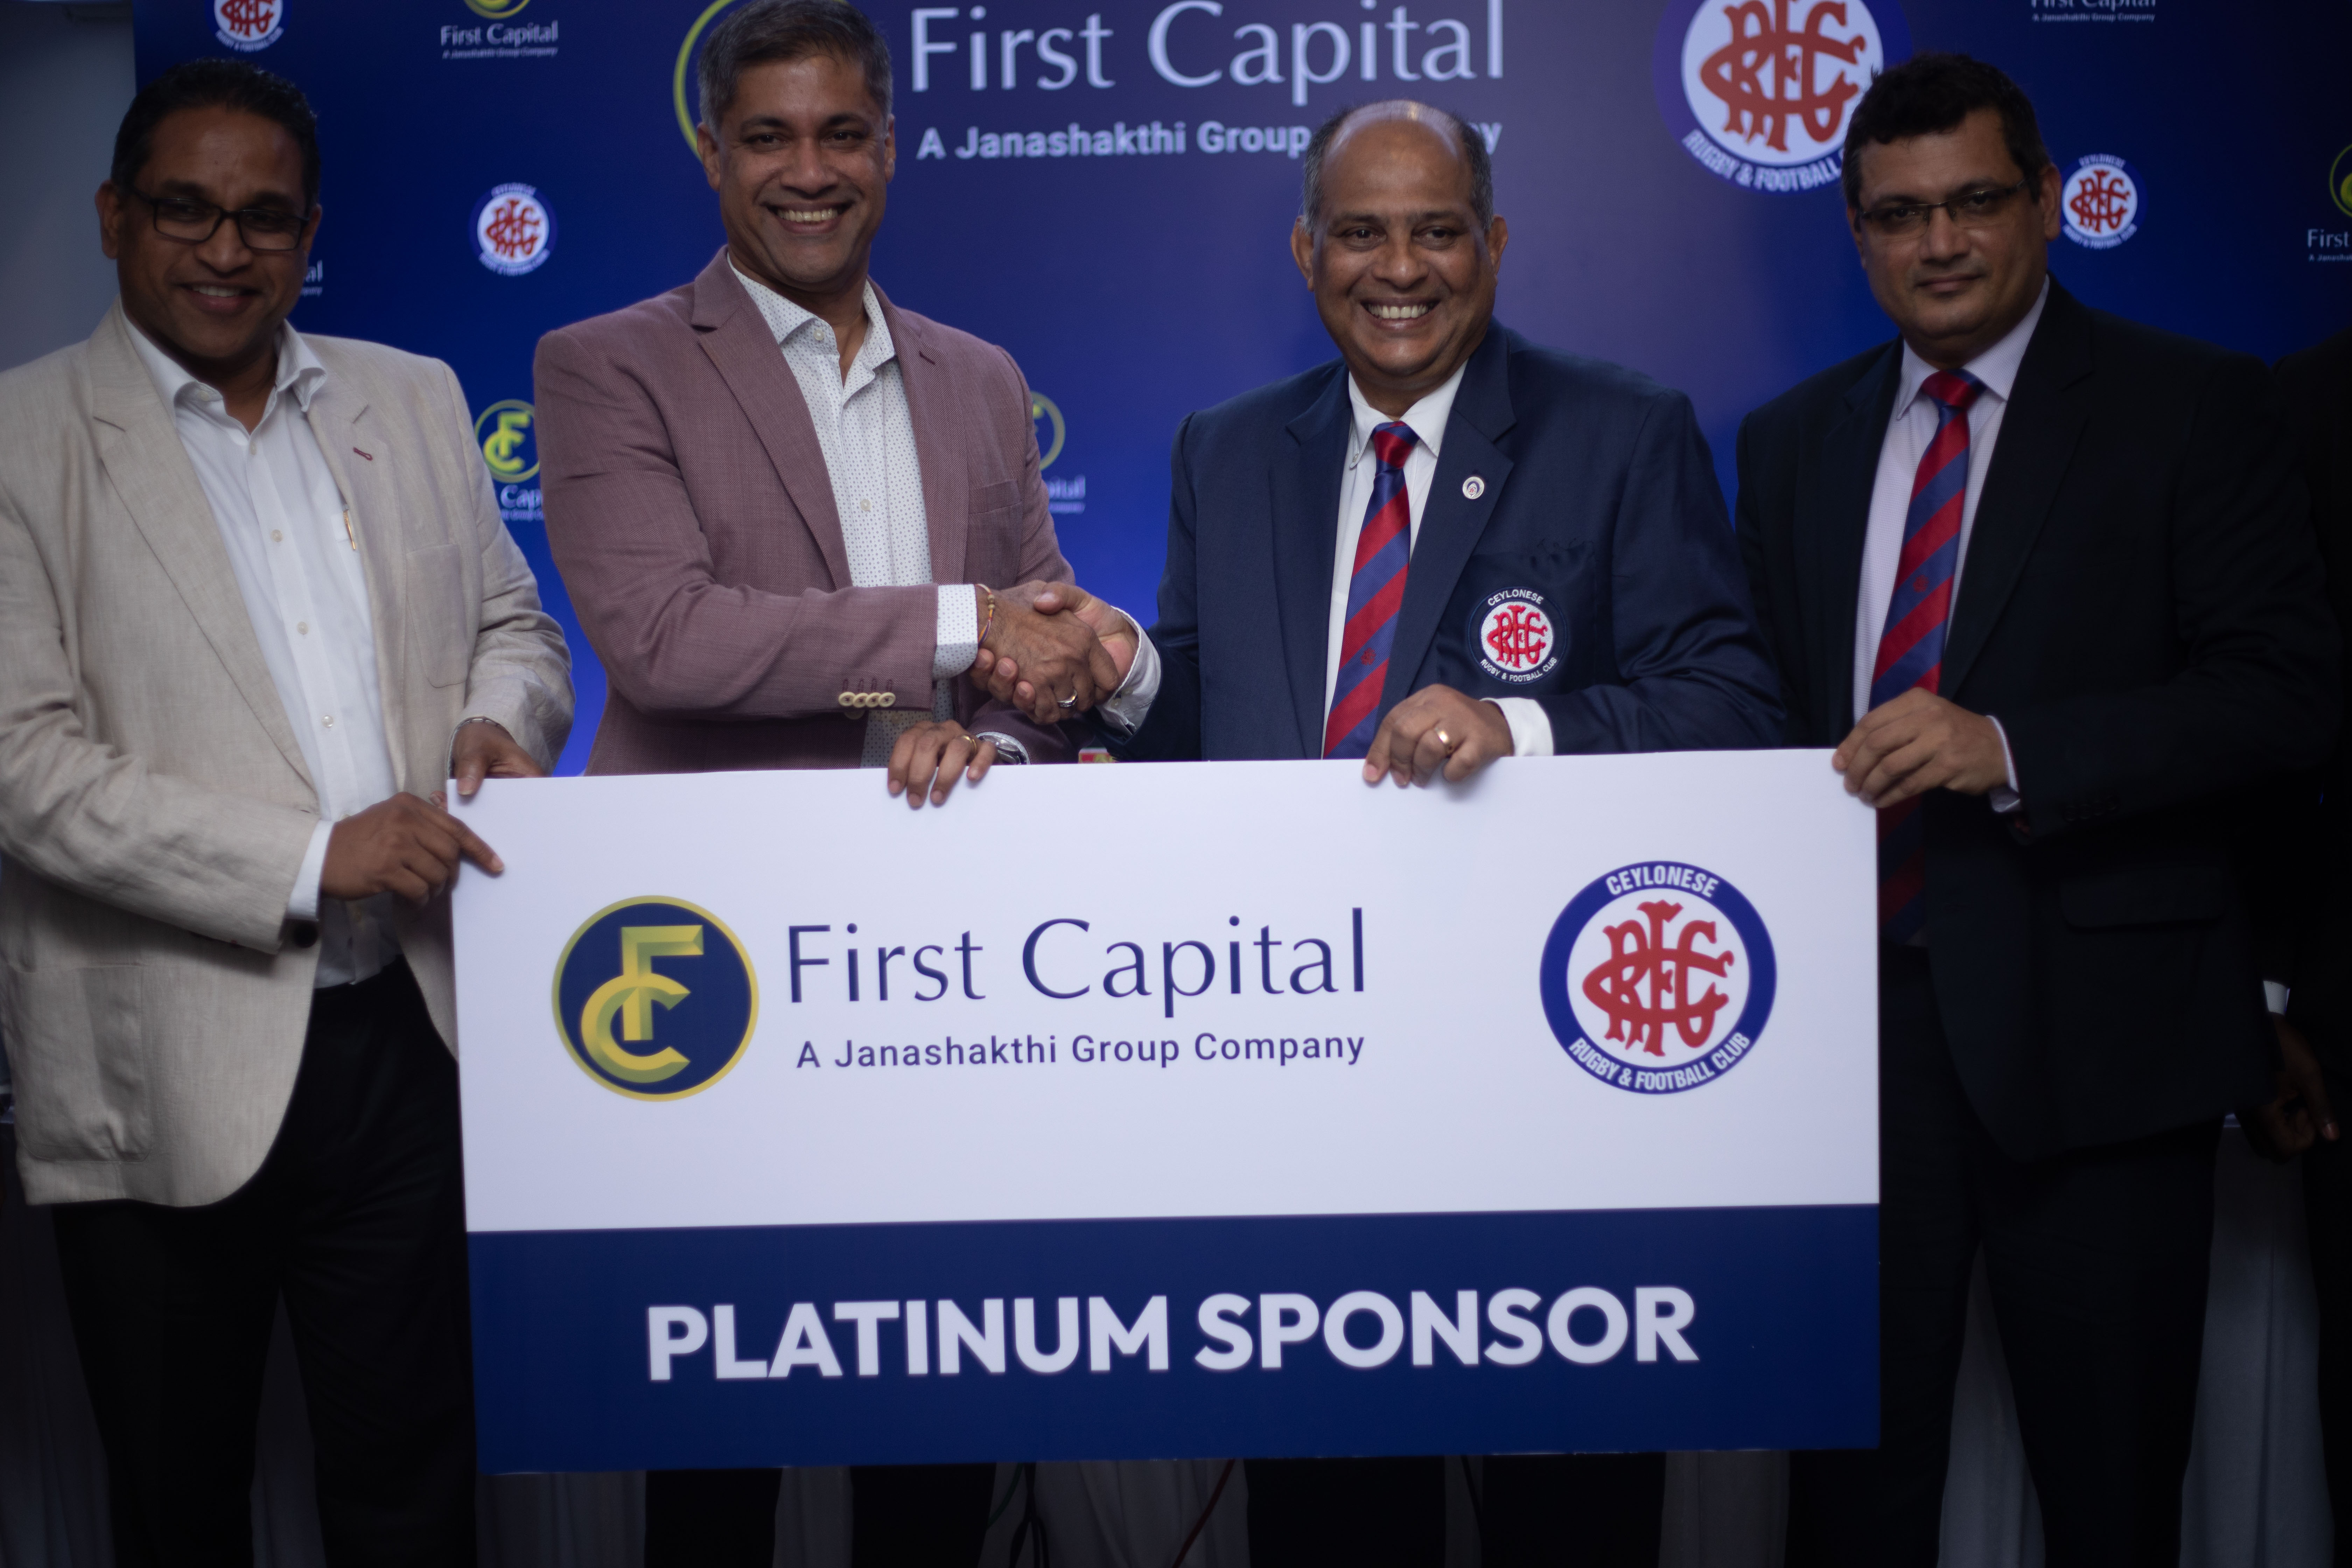 First Capital Announces Platinum Sponsorship and Steps onto the Rugby Field with CR&FC